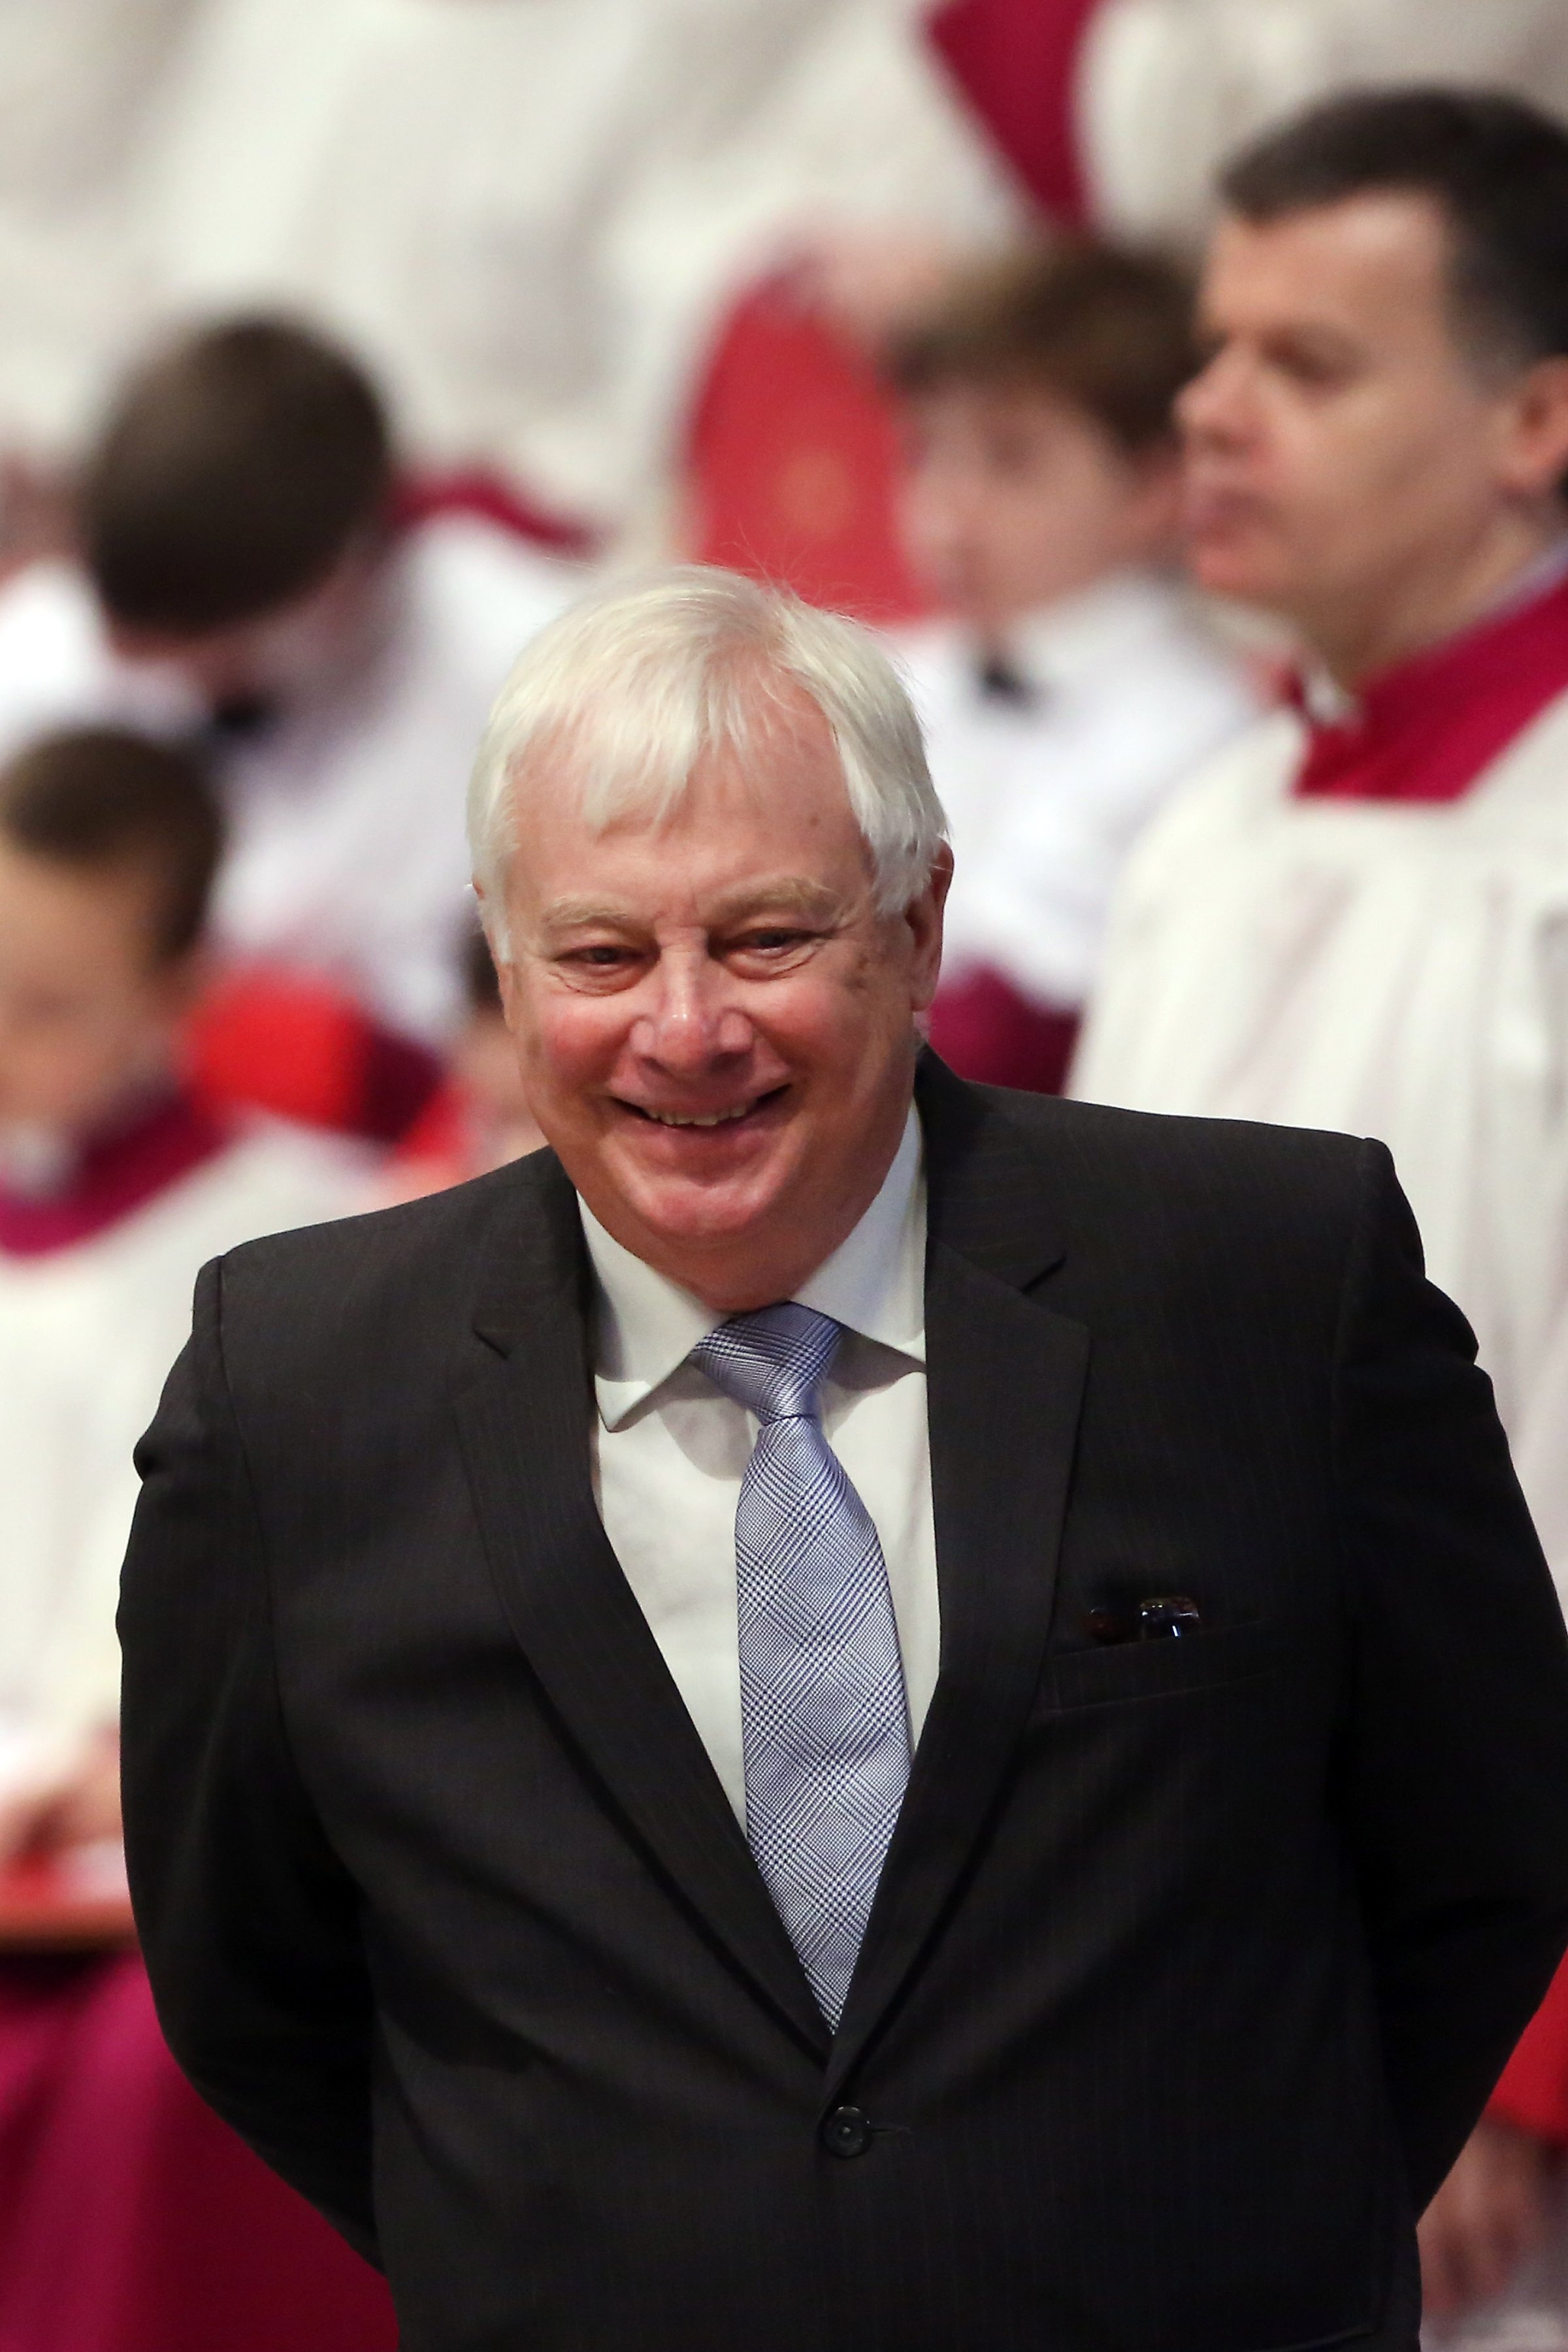 Lord Chris Patten attends a mass with newly appointed cardinals held by Pope Francis at St Peter's Basilica on February 23, 2014 in Vatican City, Vatican.